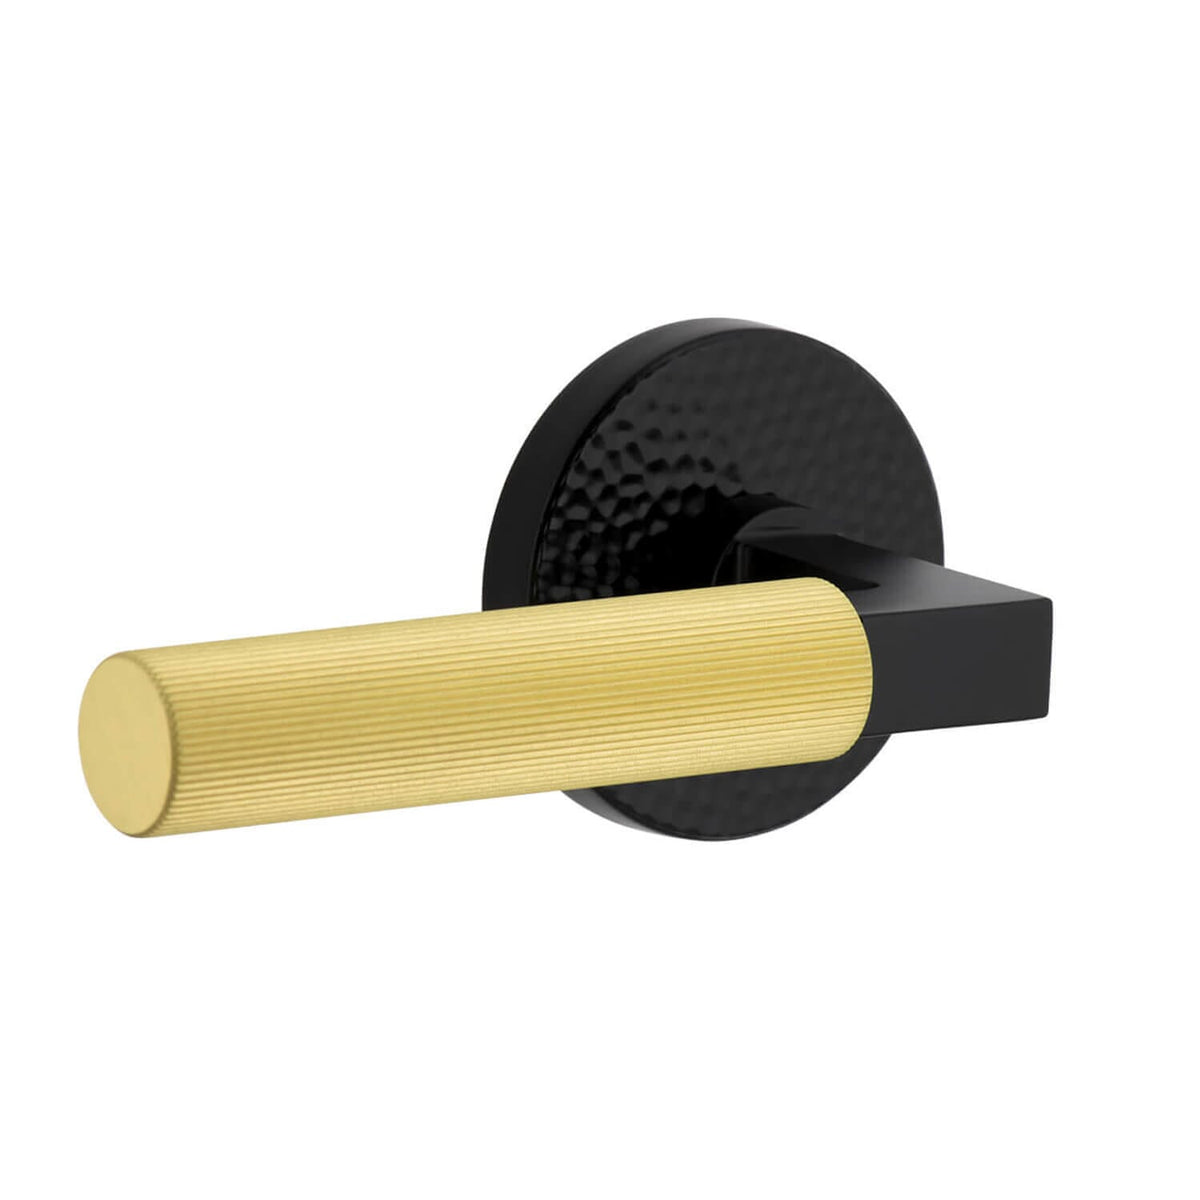 Circolo Hammered Rosette in Satin Black with Satin Brass Contempo Fluted Lever